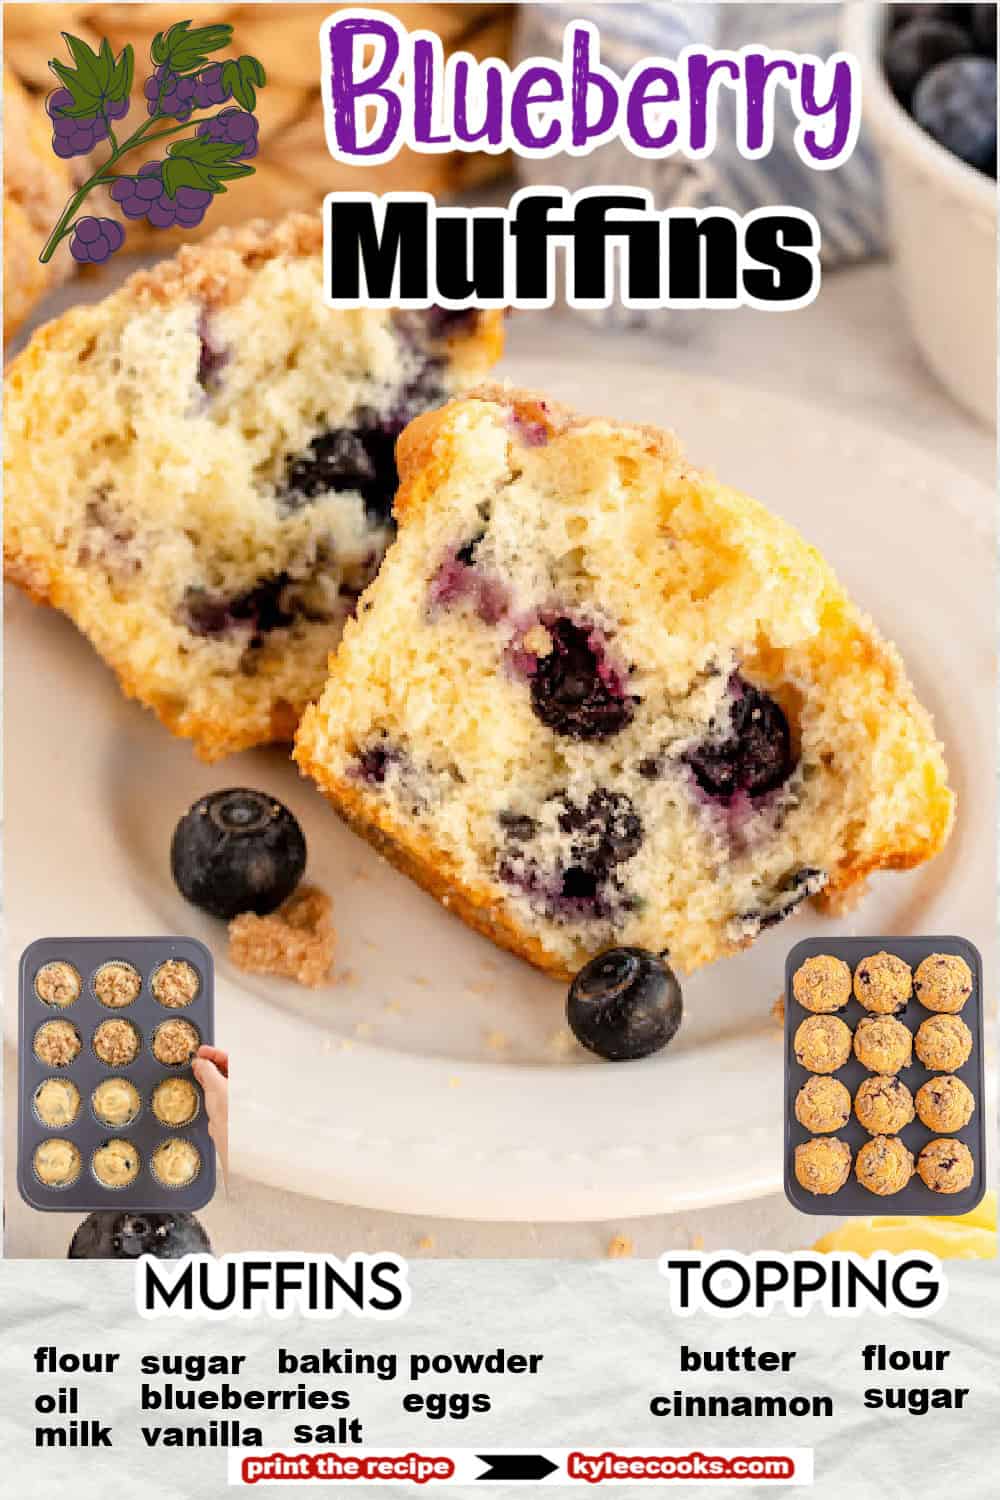 a cut open blueberry muffin with recipe name and ingredients overlaid in text.